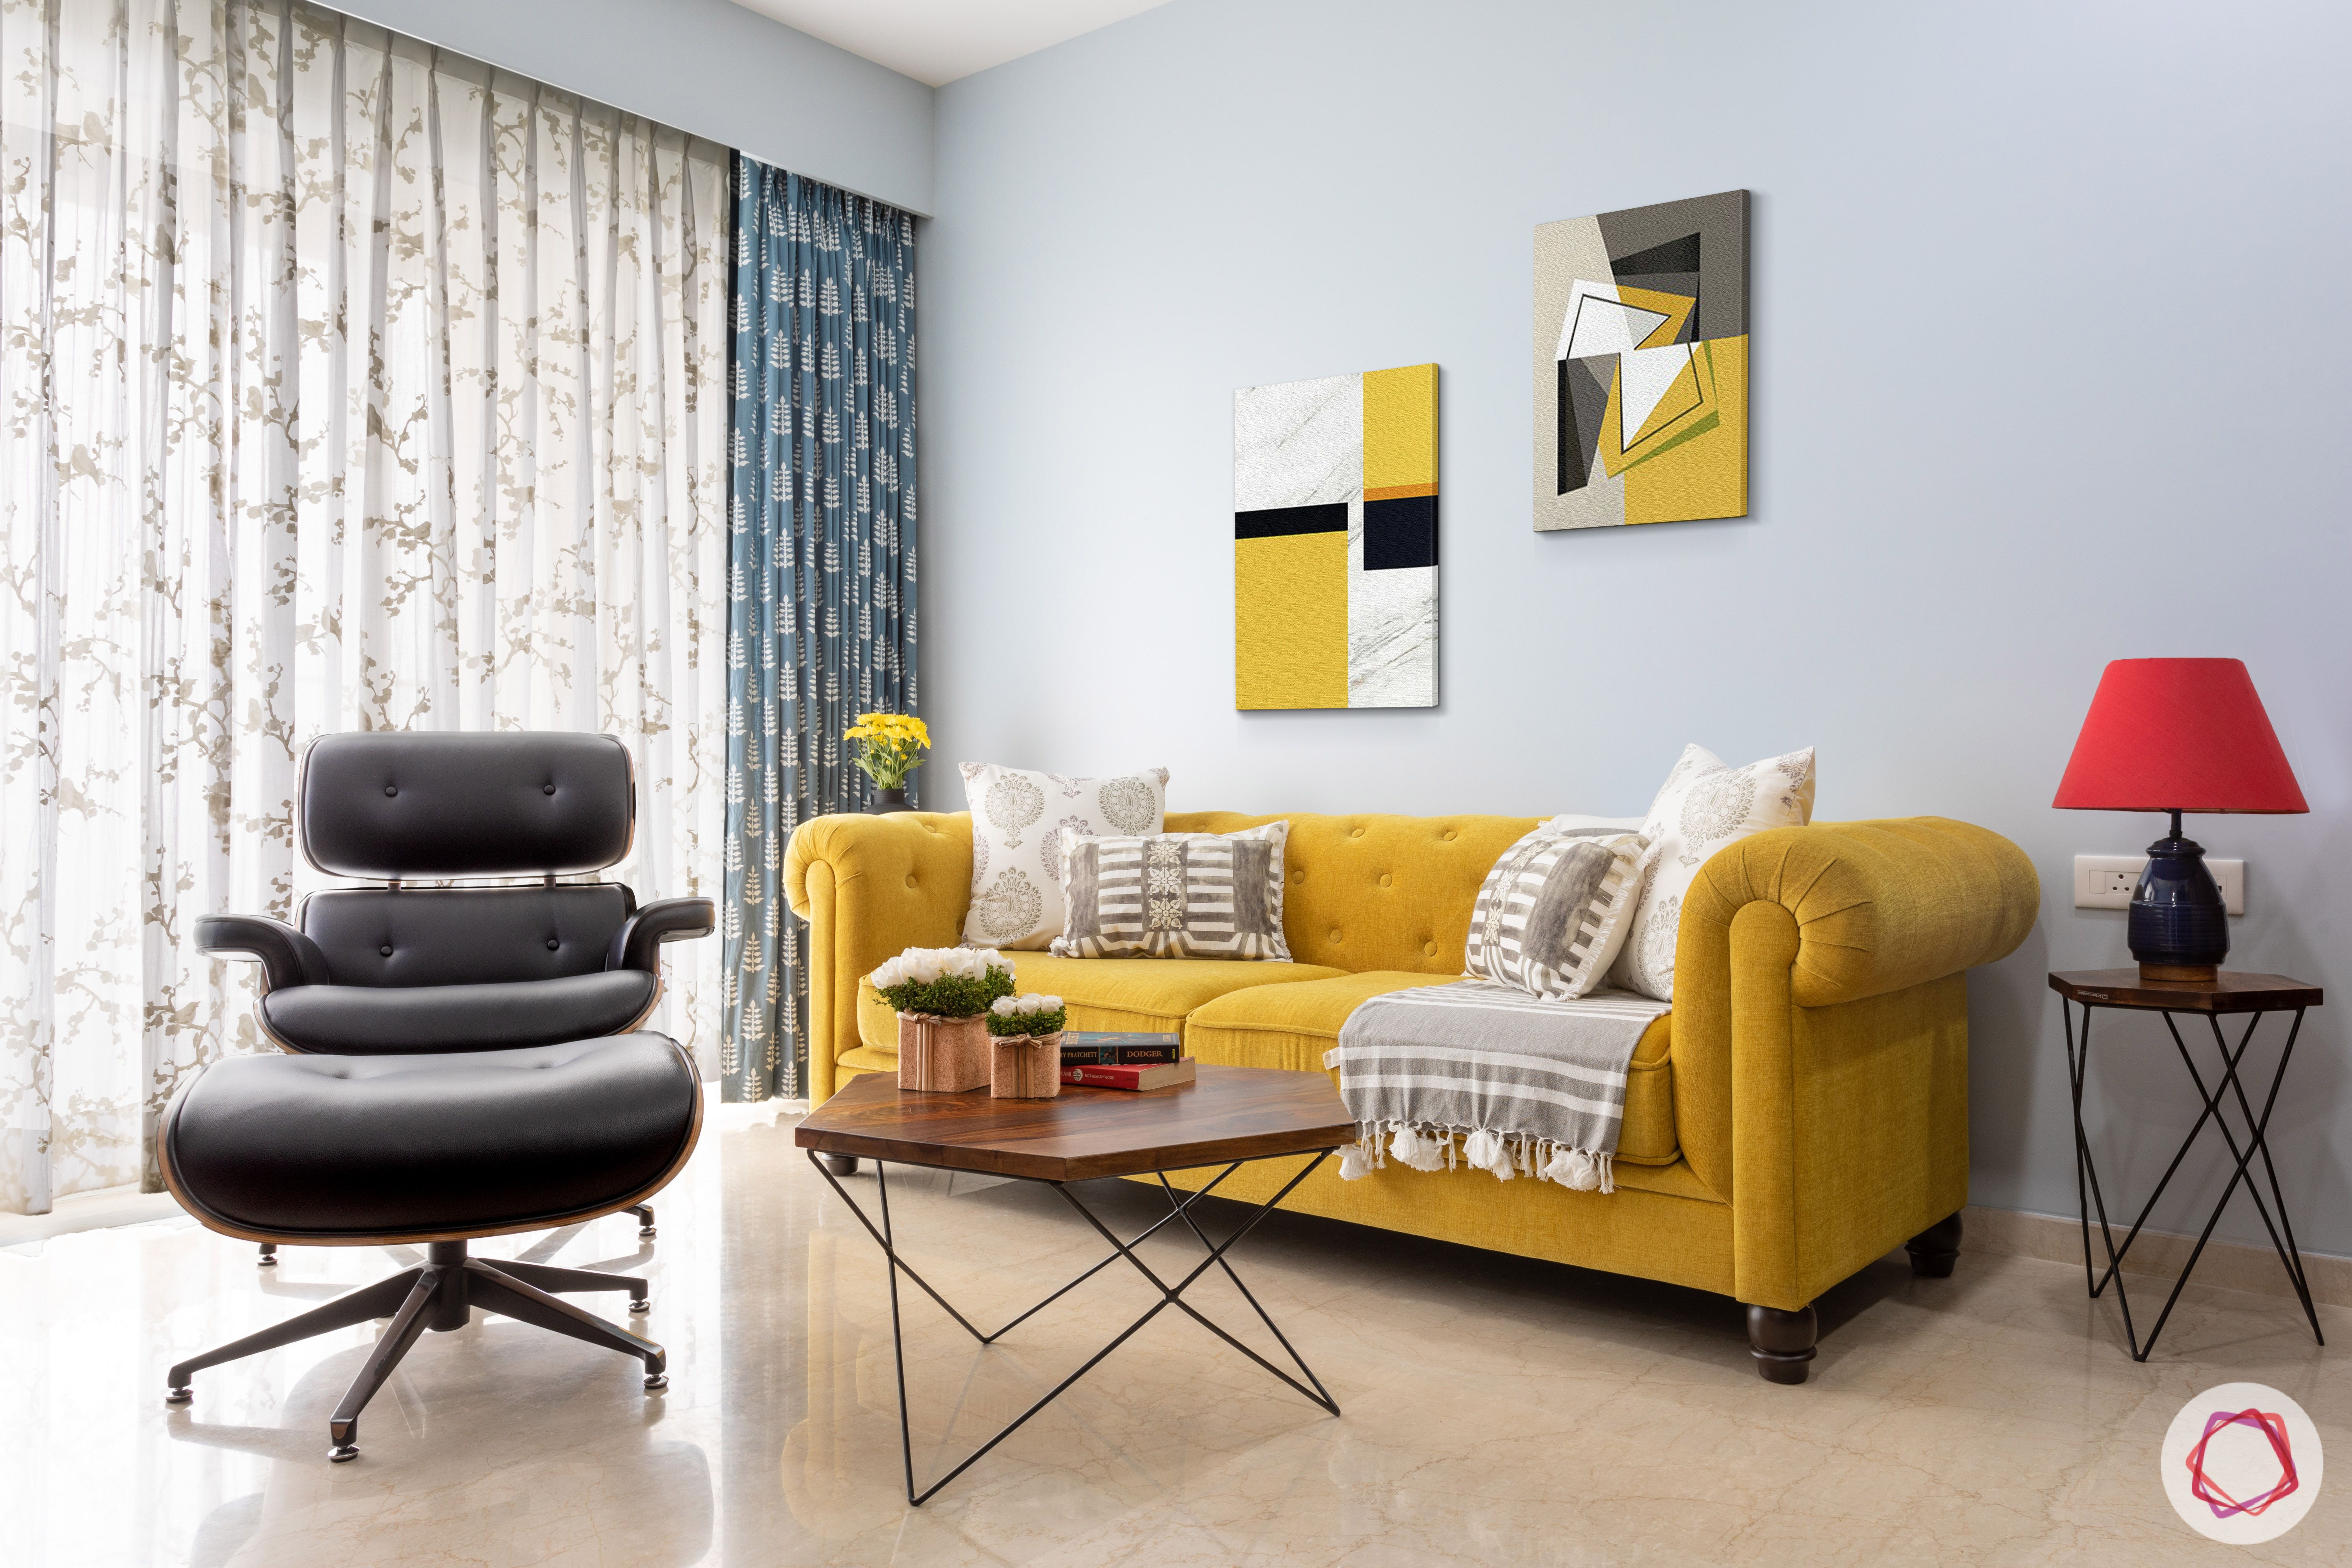 crescent bay-living room-yellow sofa-blue wall-wooden furniture